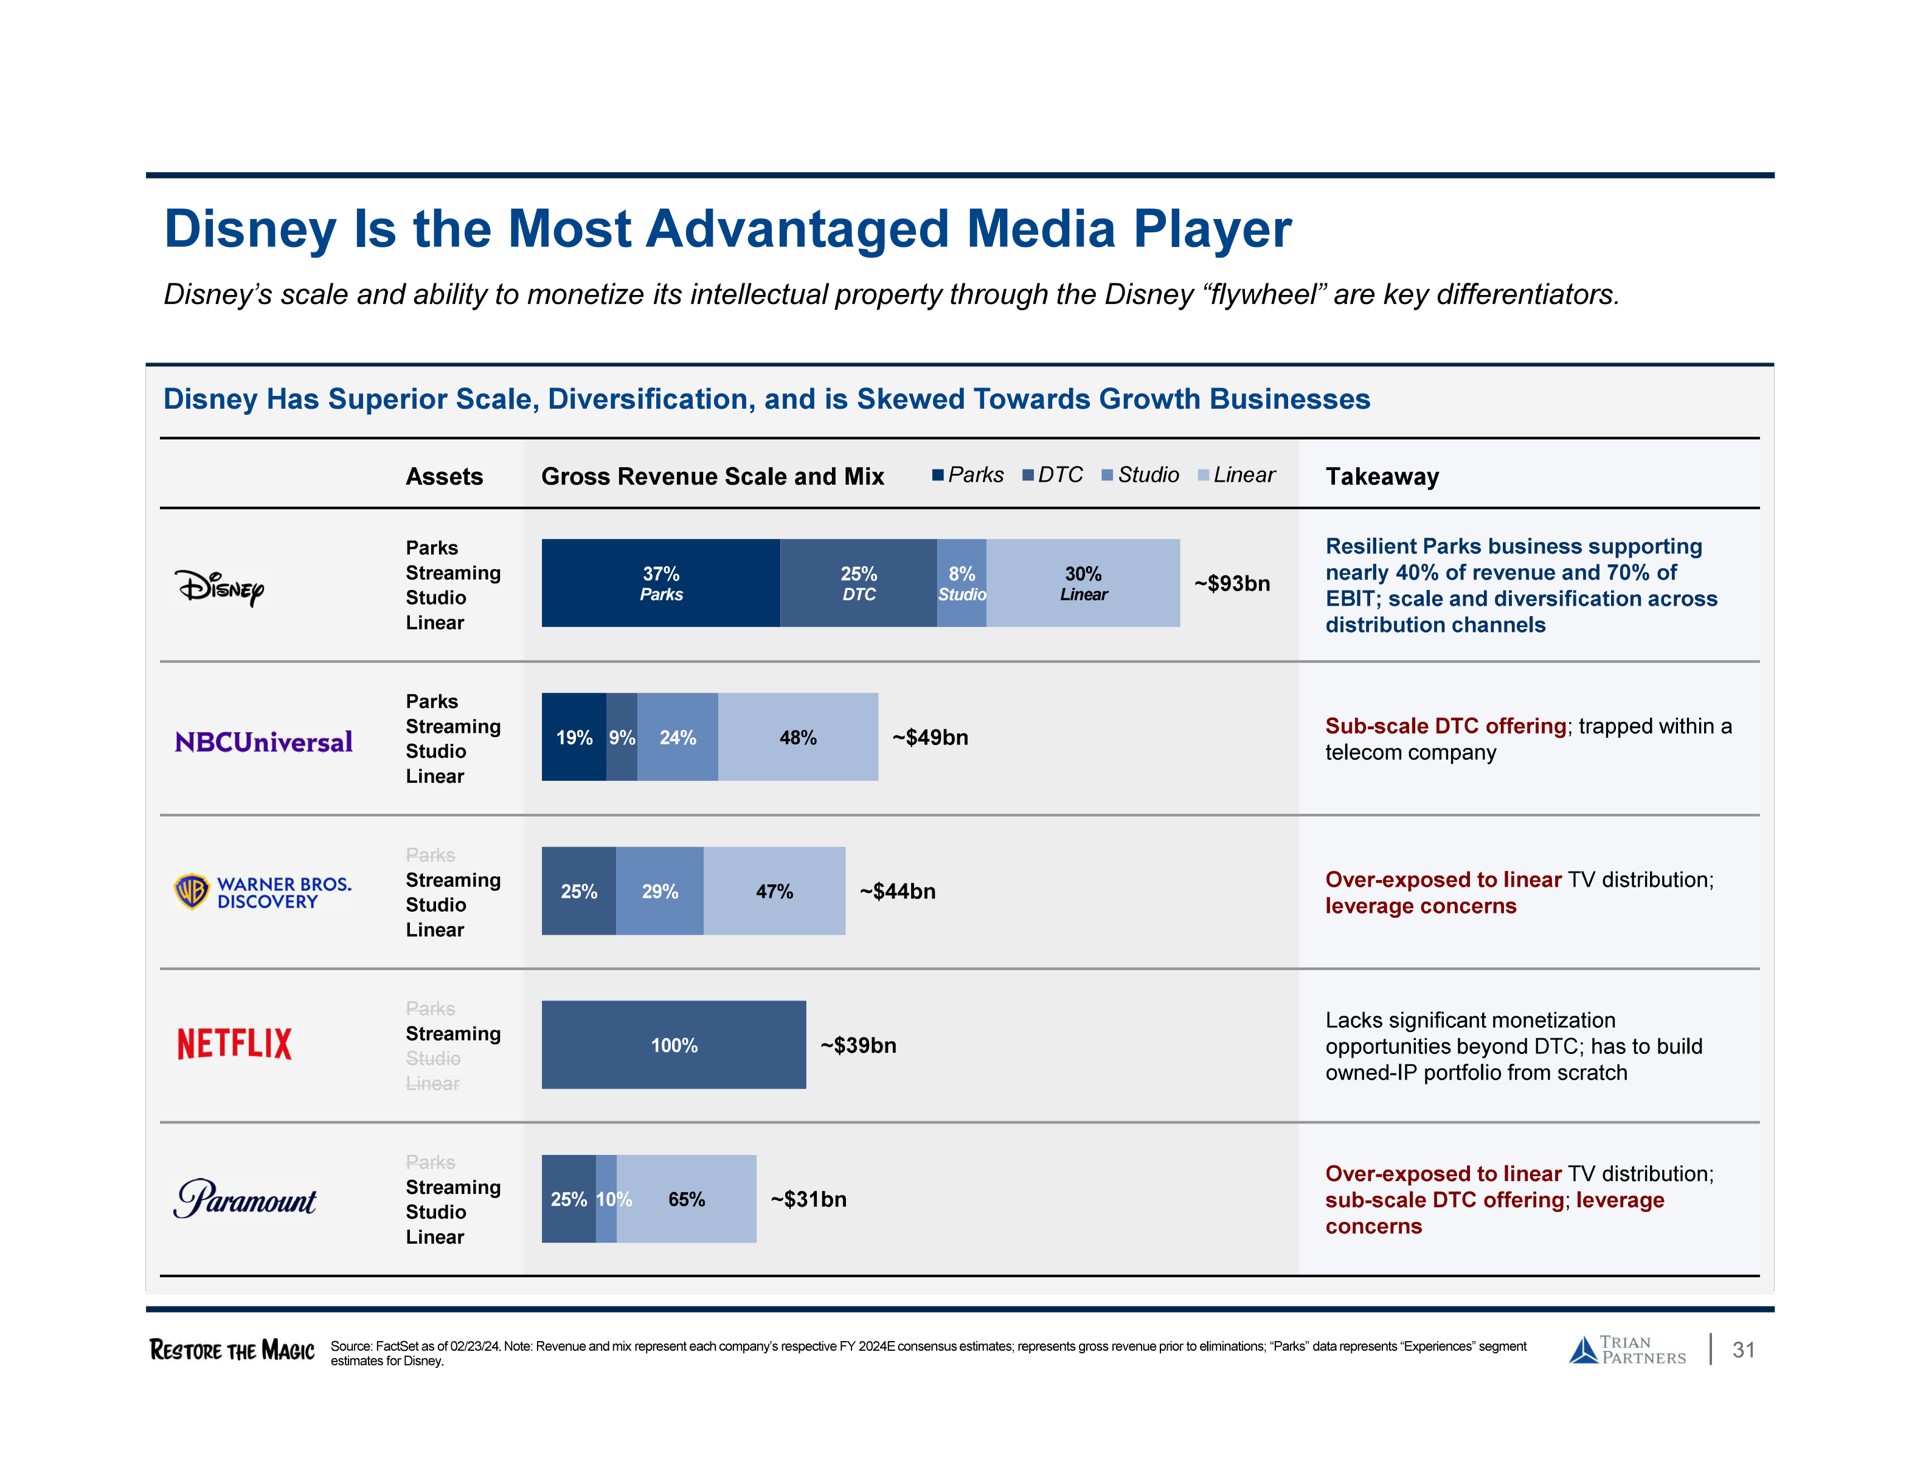 is the most advantaged media player | Trian Partners